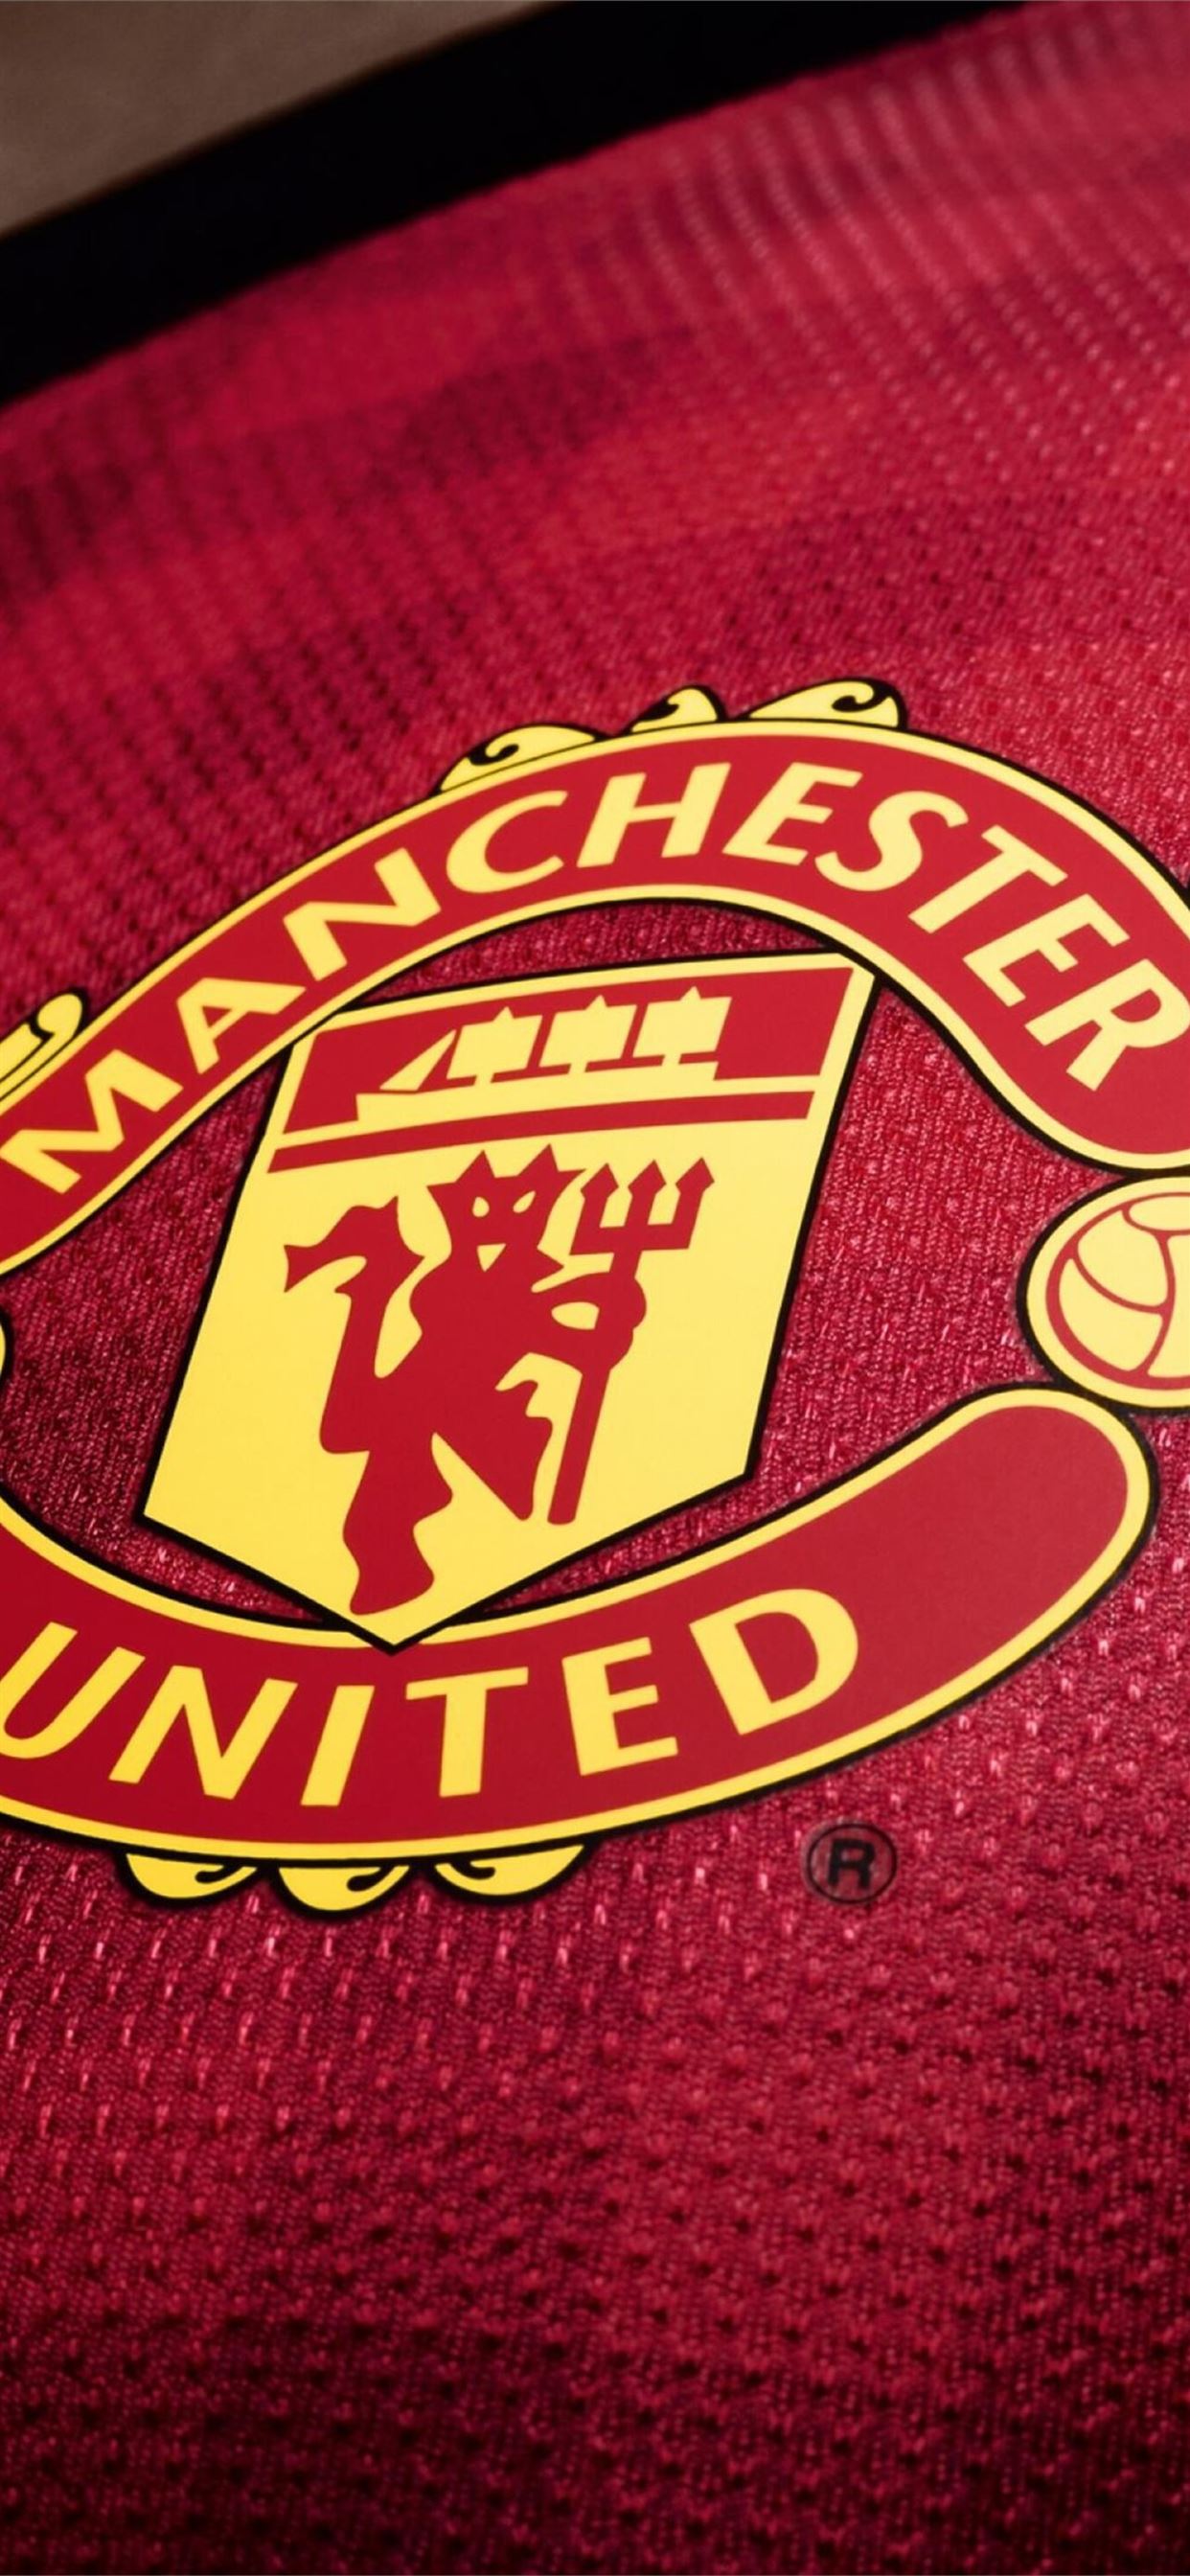 Manchester United Manchester United S8 iPhone Wallpapers Free Download